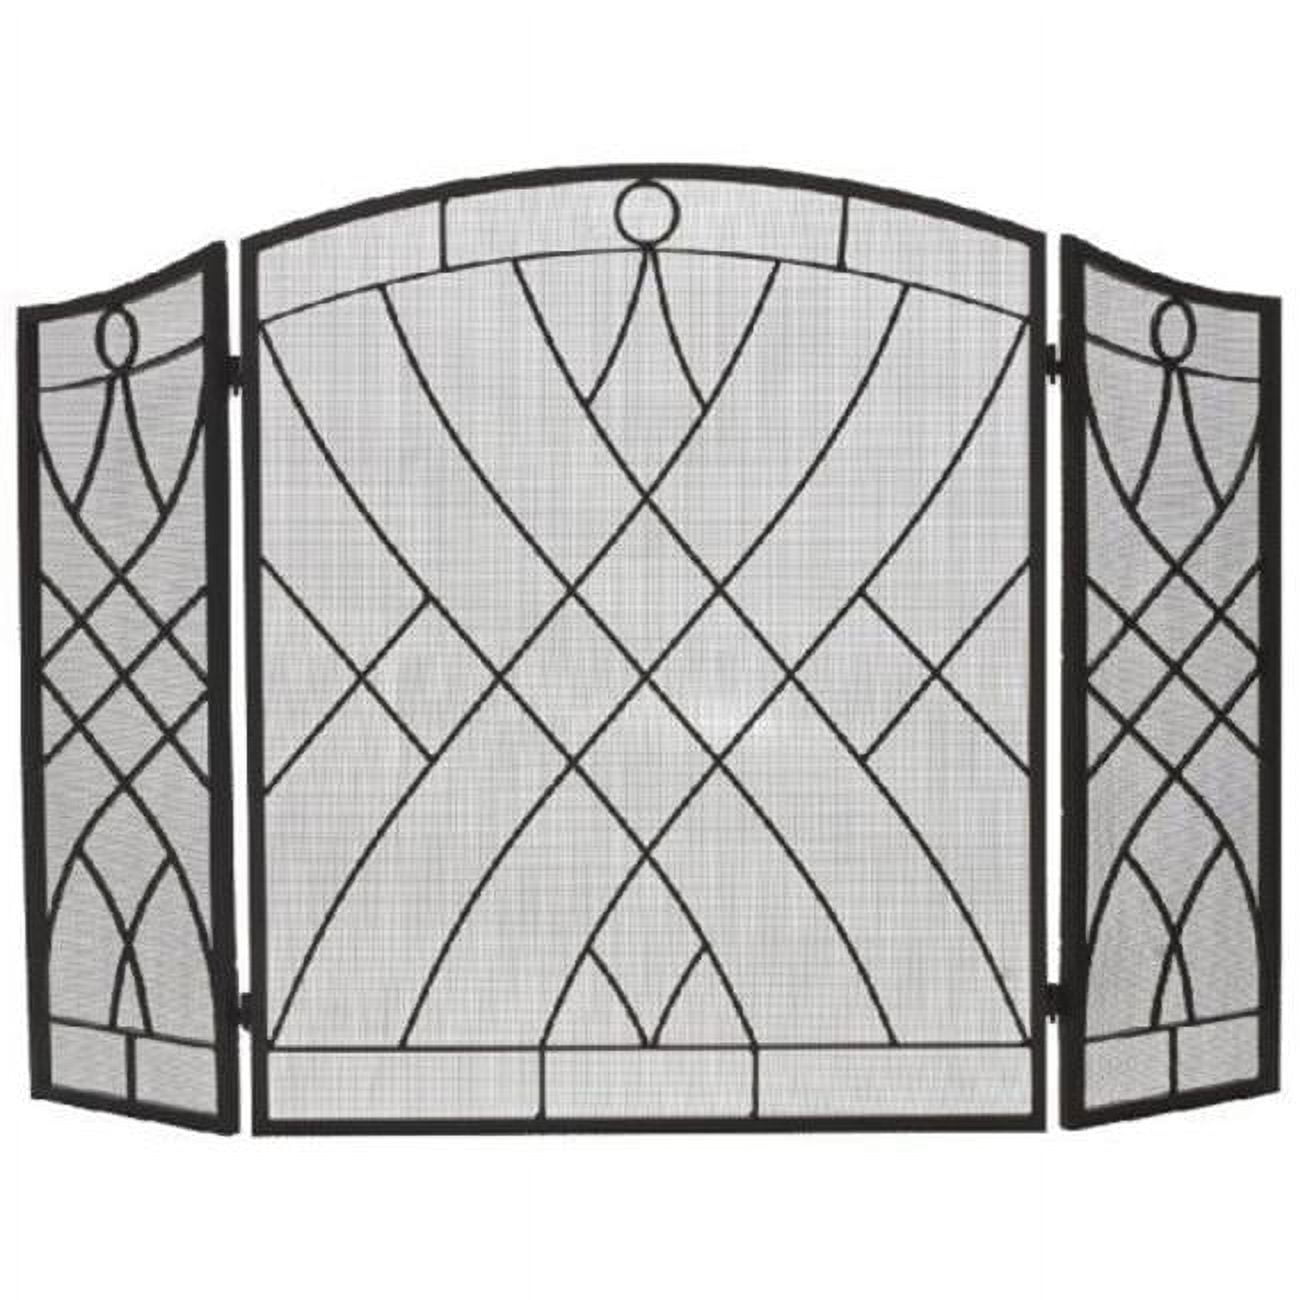 Picture of Dagan AHS116 Weave Design 3 Fold Arched Wrought Iron Screen, Black